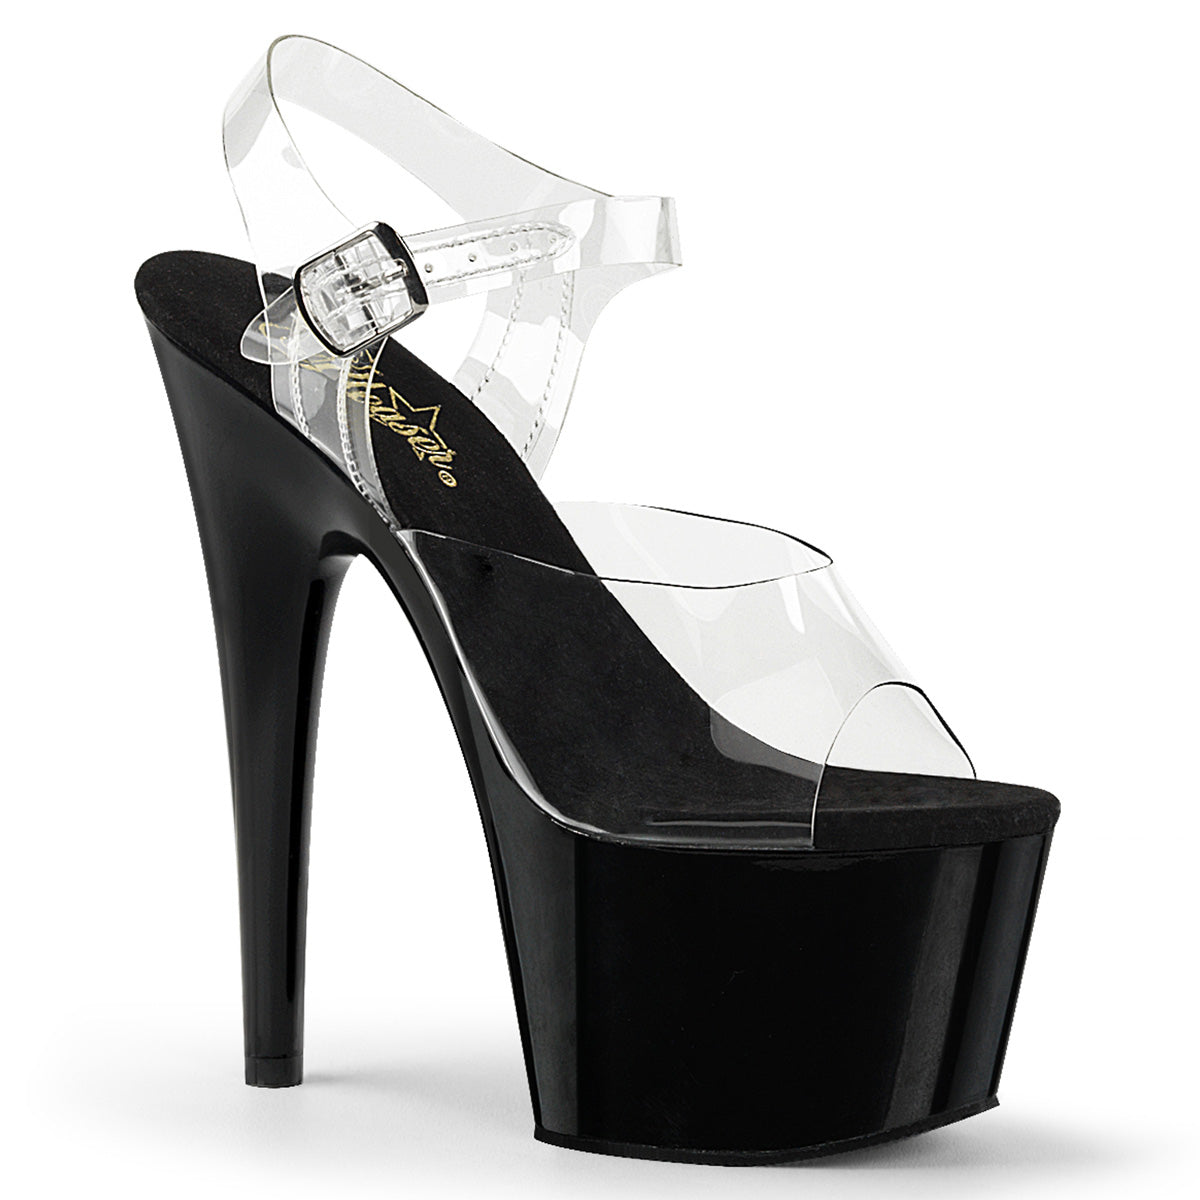 ADORE-708 Pleasers 7" Heel Clear and Black Pole Dancing Shoes